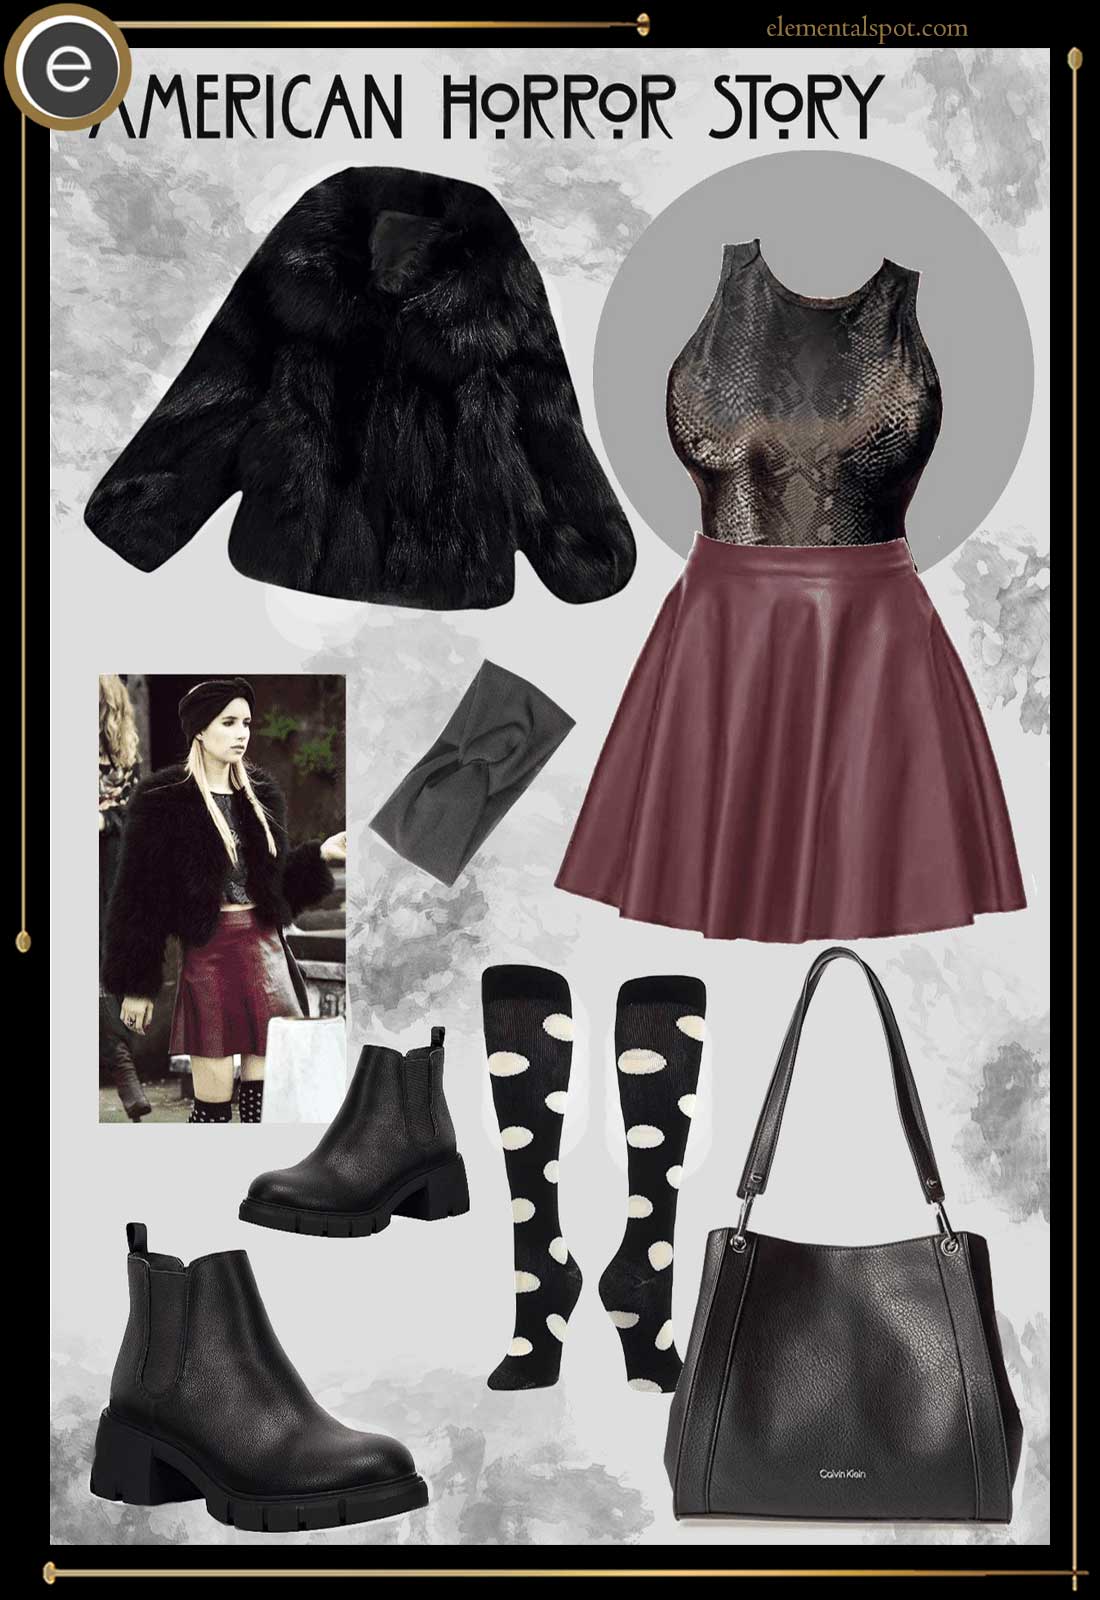 Steal the Look - Dress Like Madison from American Horror Story - Elemental  Spot